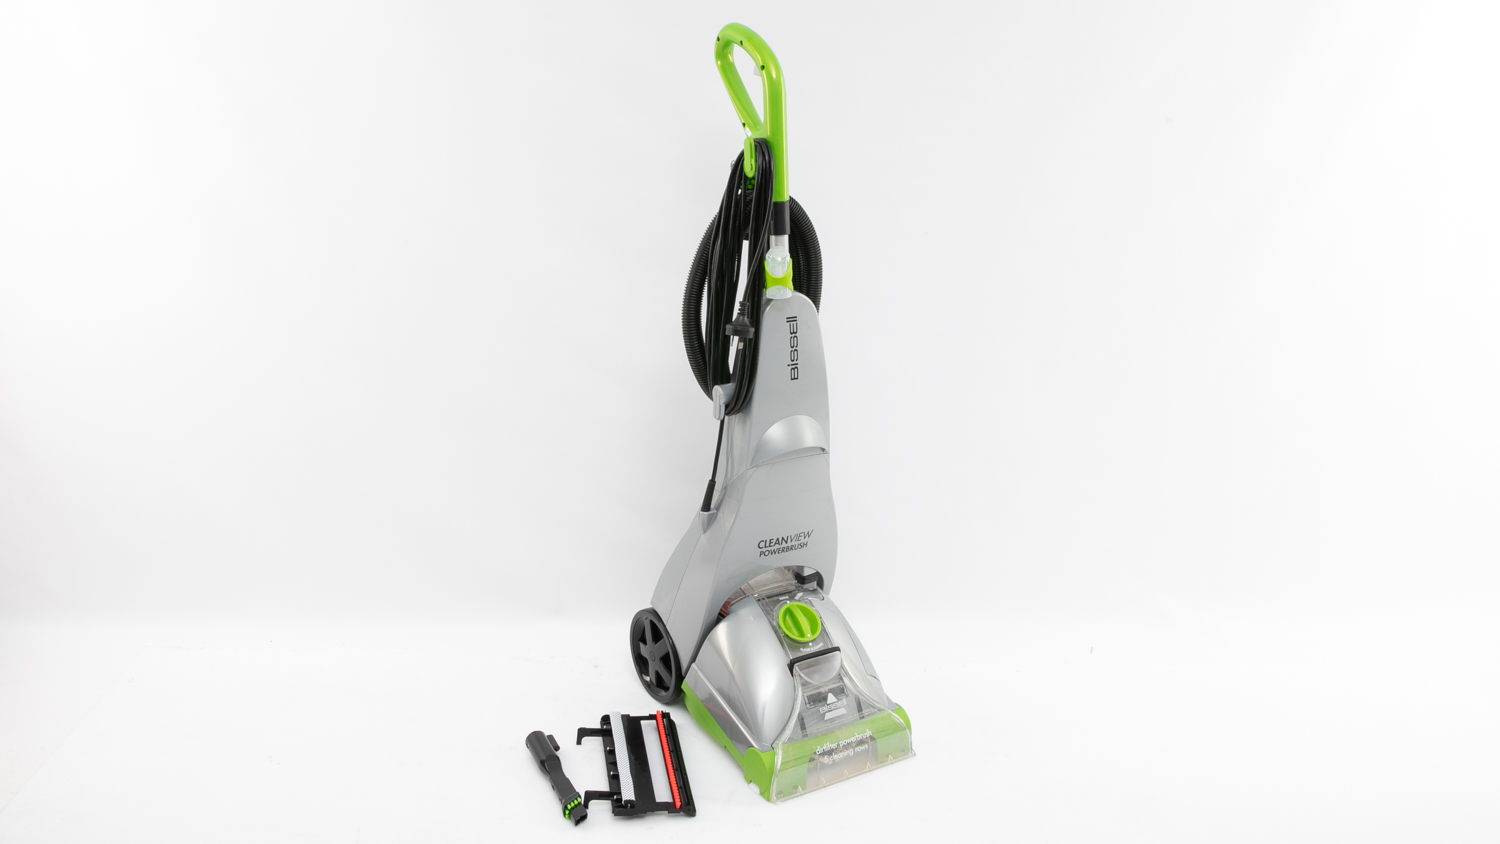 Bissell CleanView PowerBrush (37E3G) carousel image